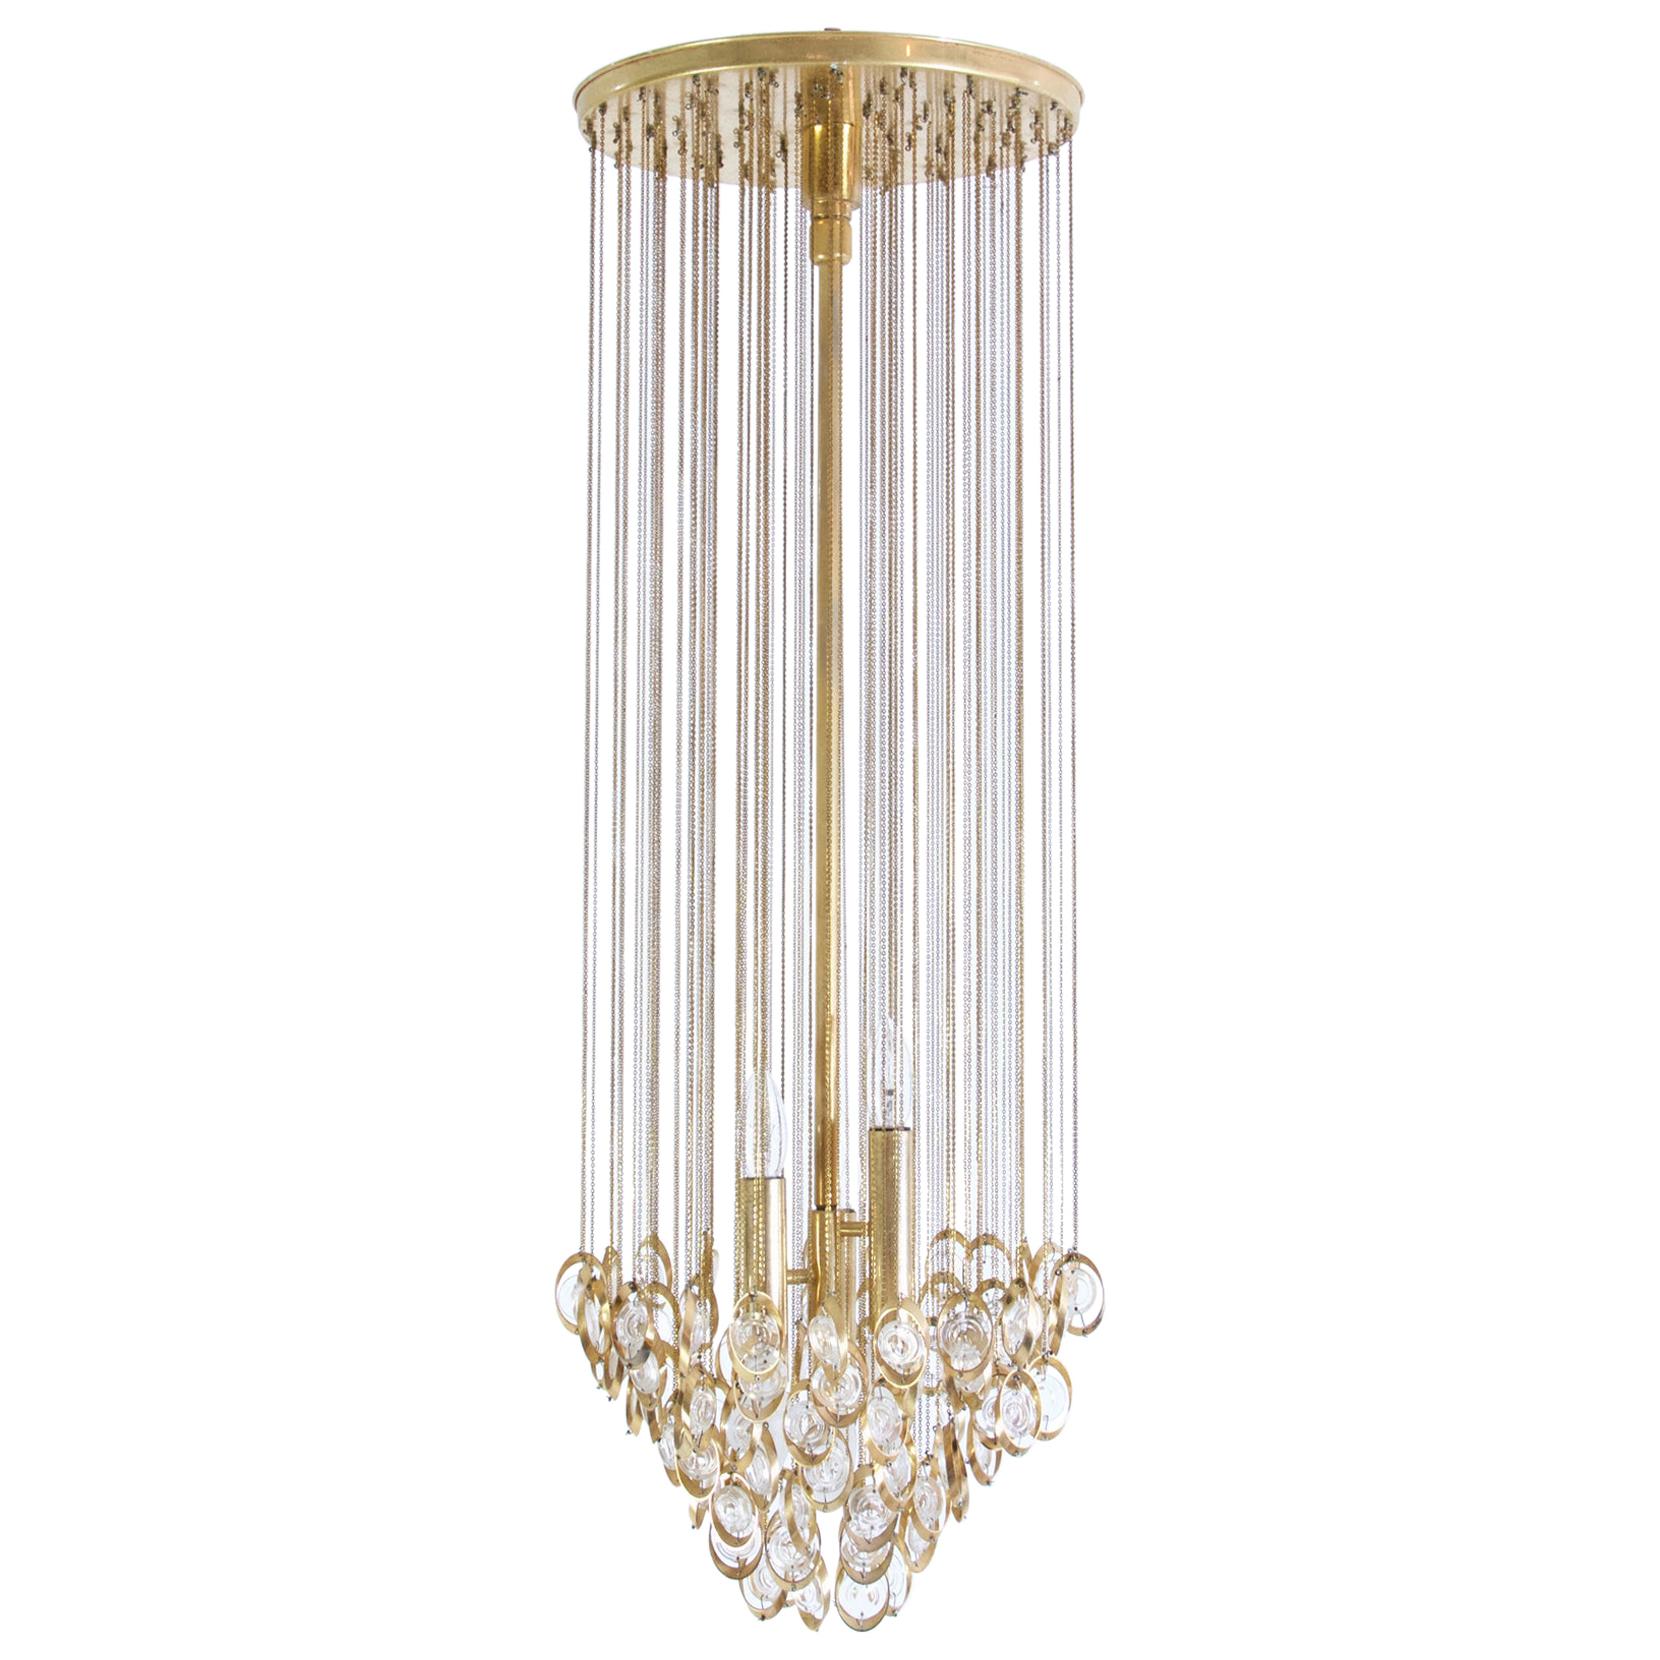 Large 1960s Italian Cascading Glass Chandelier For Sale